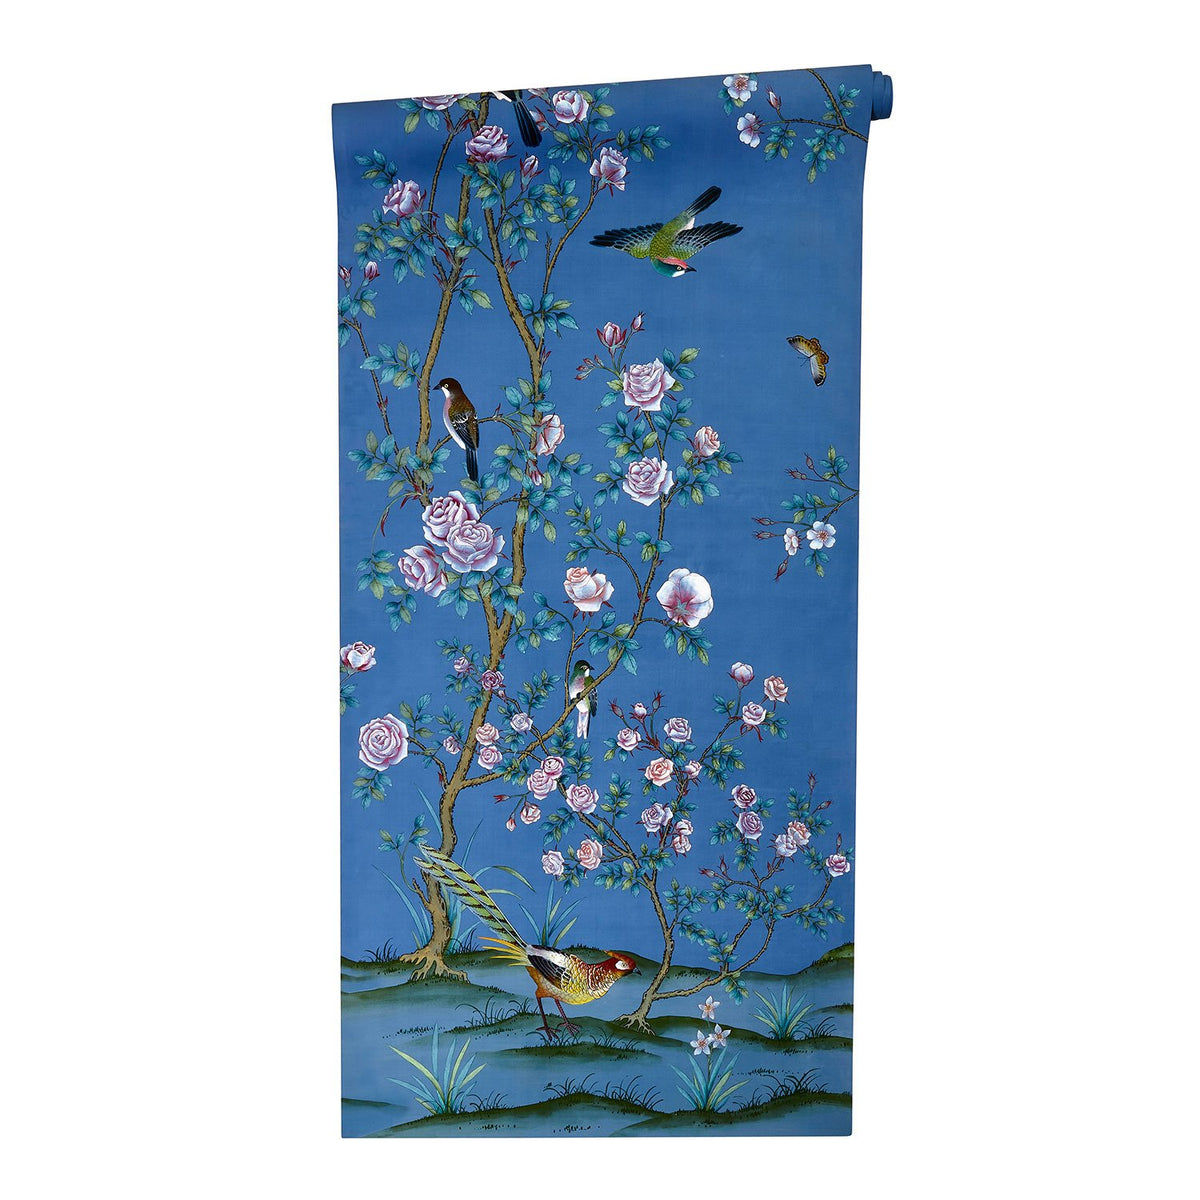 Chinoiserie Wallpaper Mural in Blue Canterbury Design on Roll